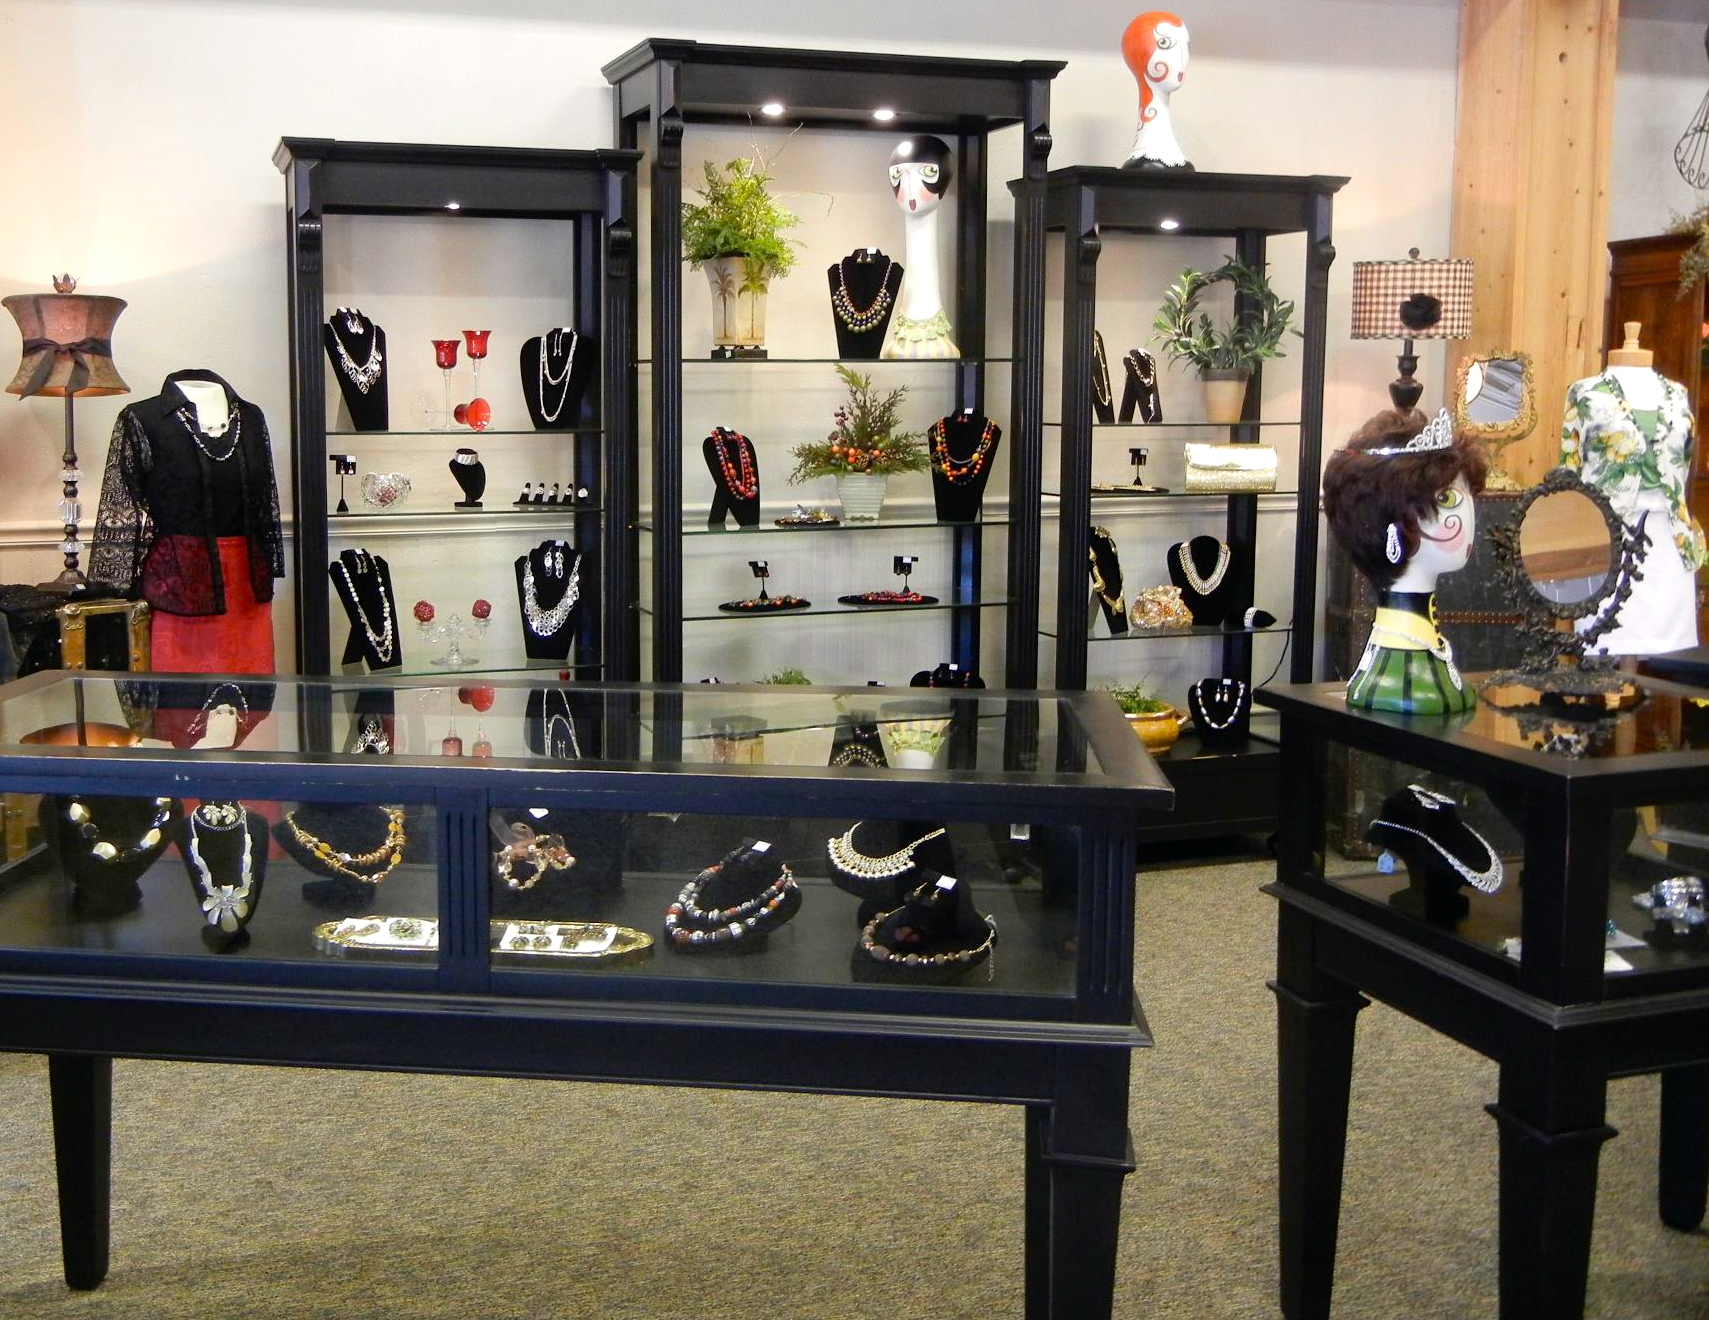 An upscale resale shop, Heirlooms features clothing, jewelry, antiques, porcelain and an impressive selection of furniture. Photo courtesy of Heirlooms for Hospice.